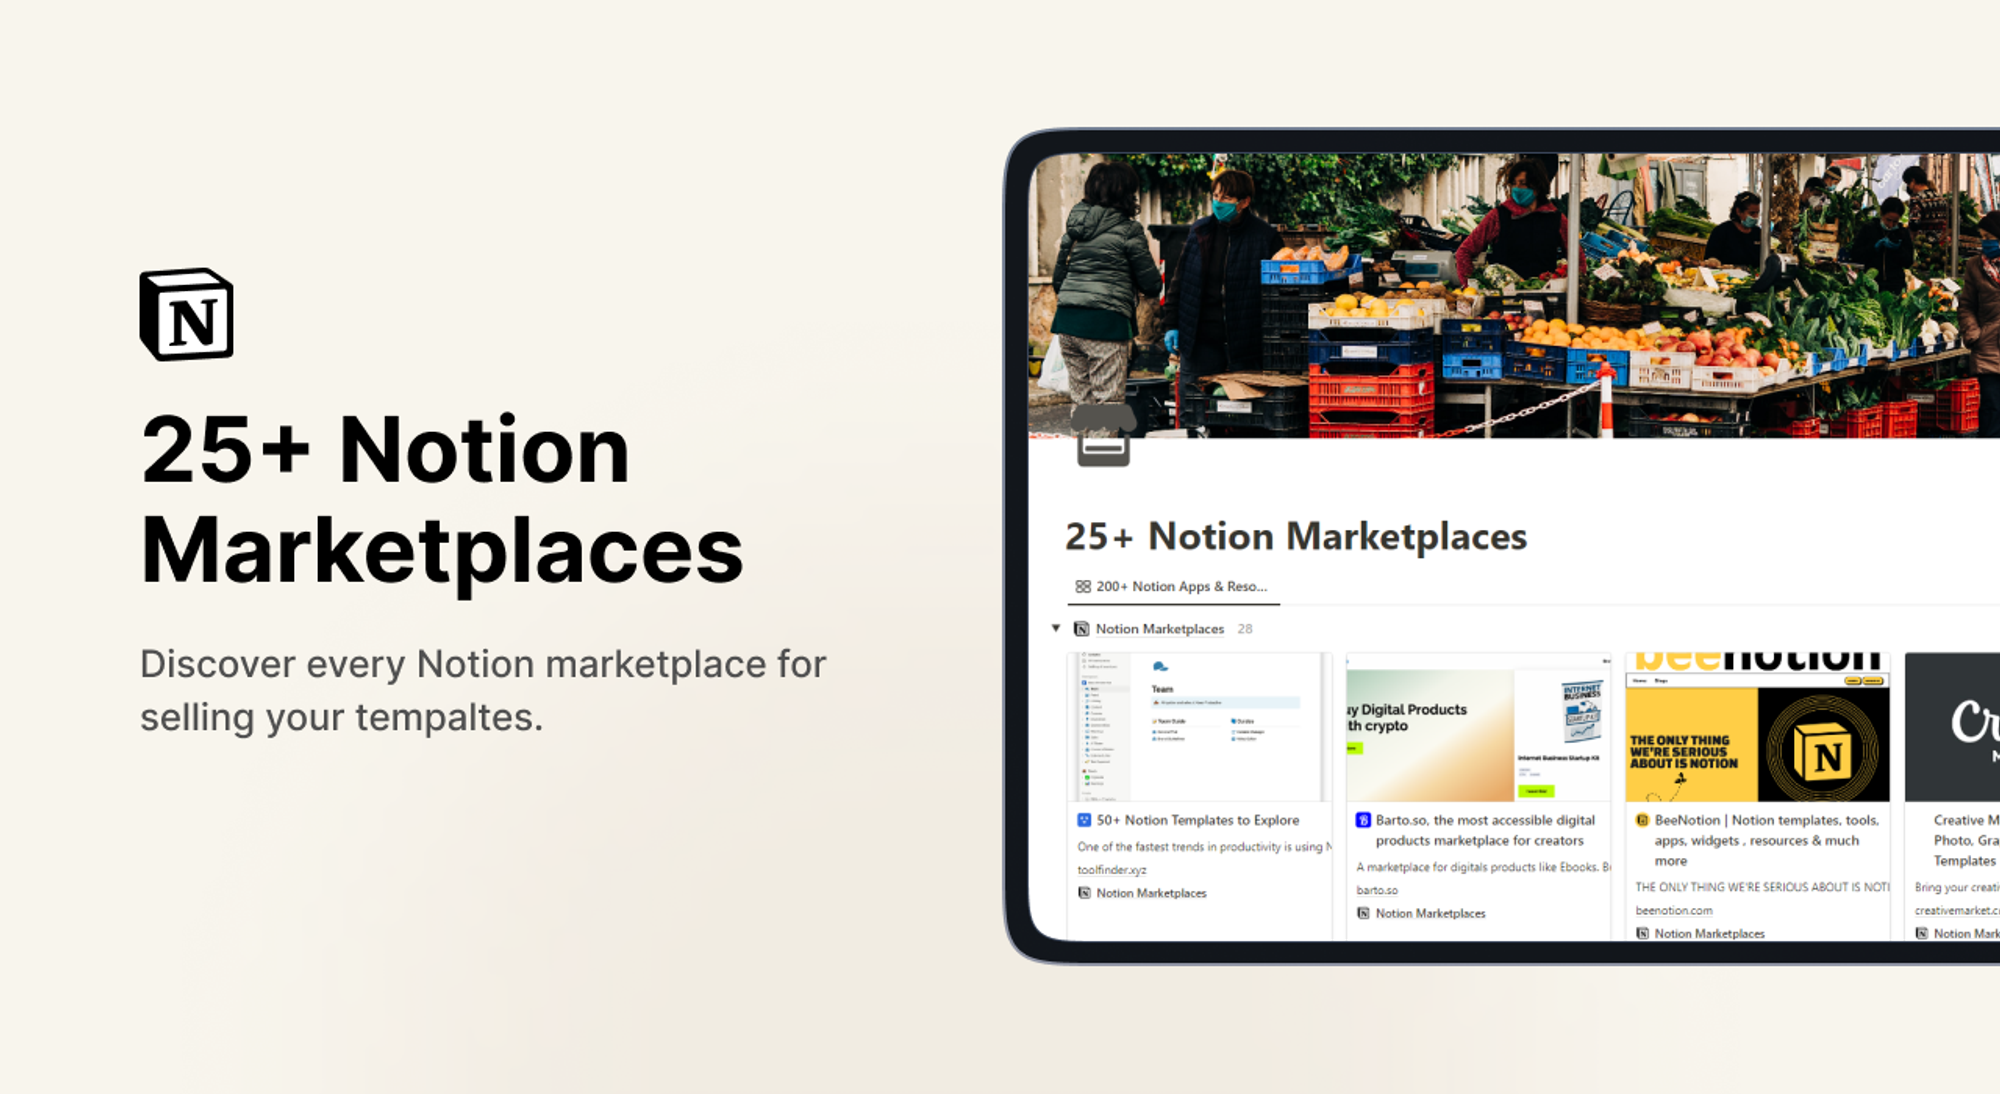 25+ Notion Marketplaces Cover.png